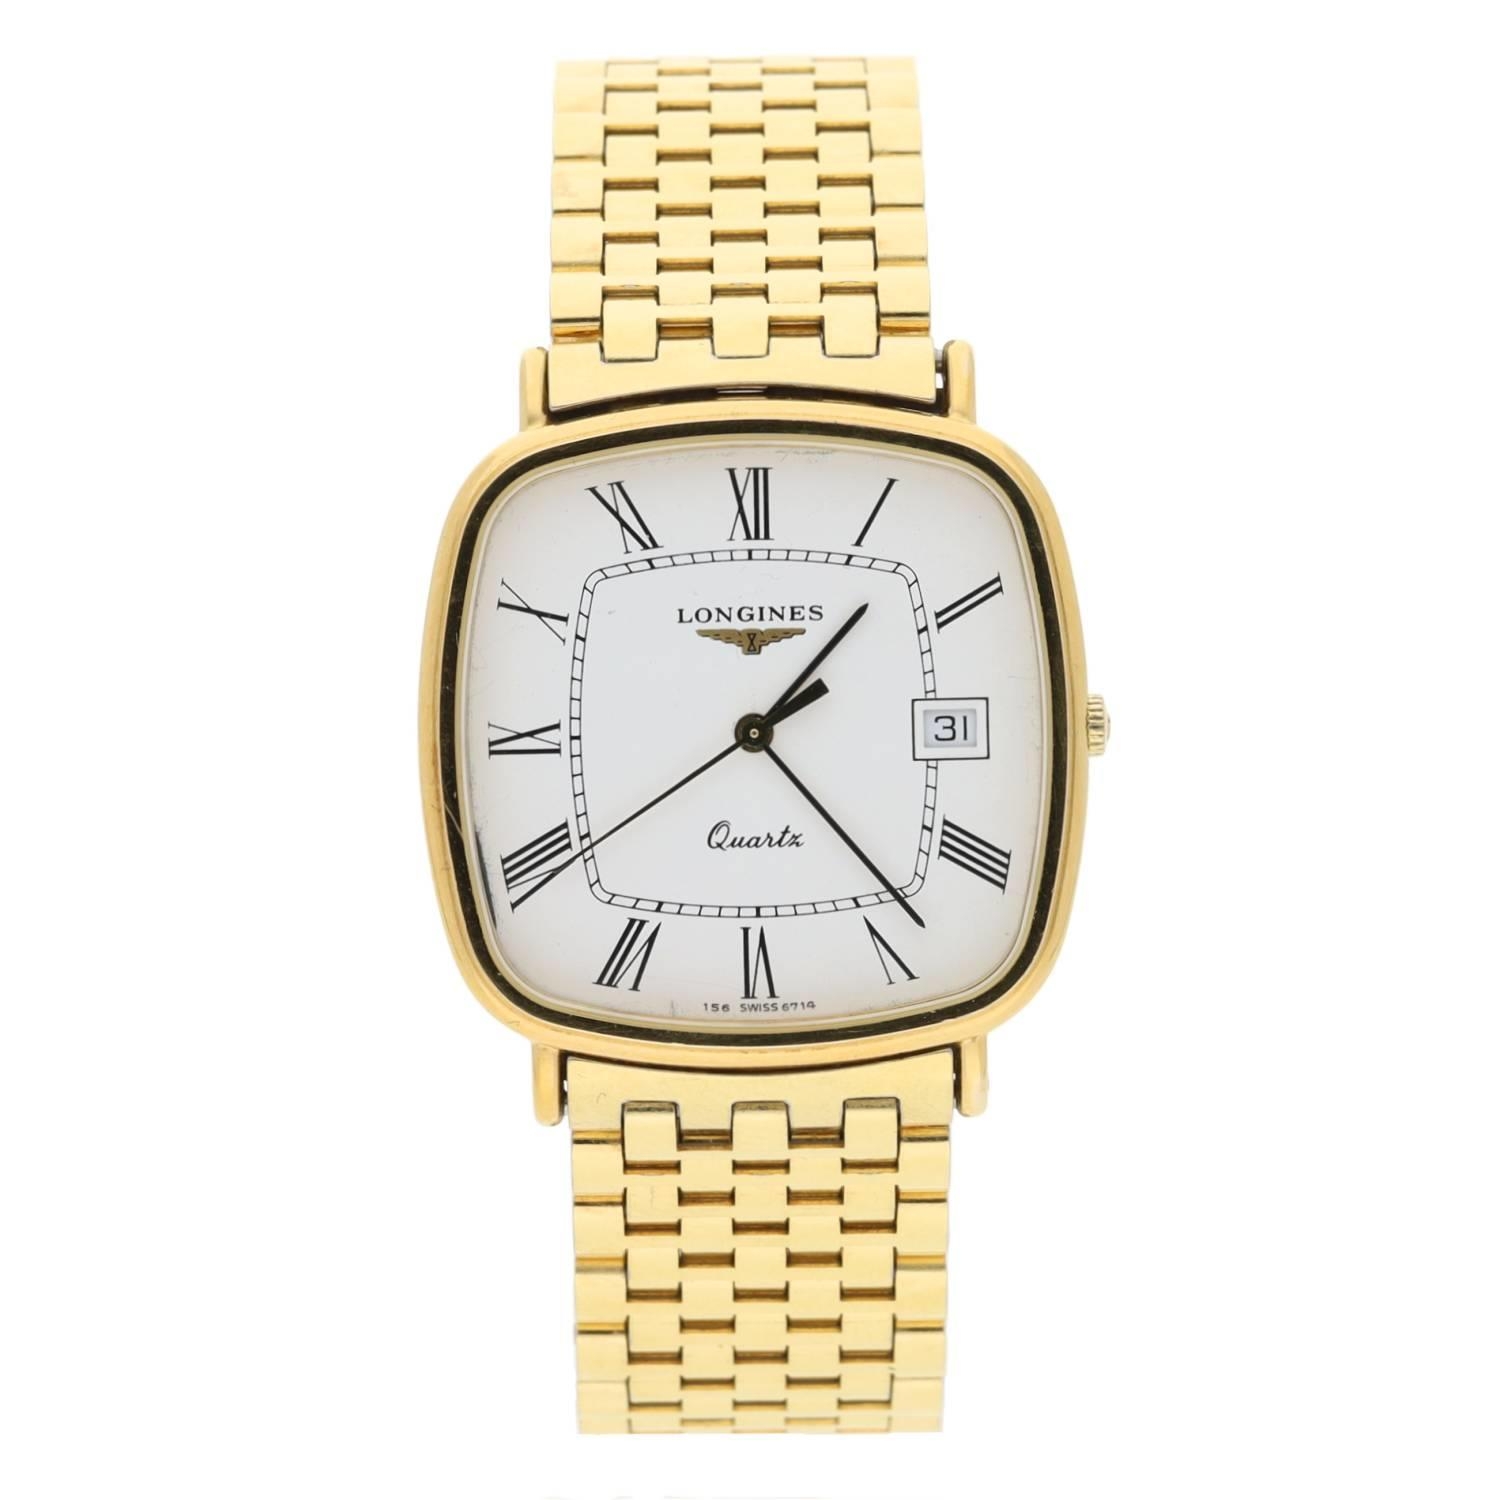 Longines Quartz square cased gold plated and stainless steel gentleman's wristwatch, case no.